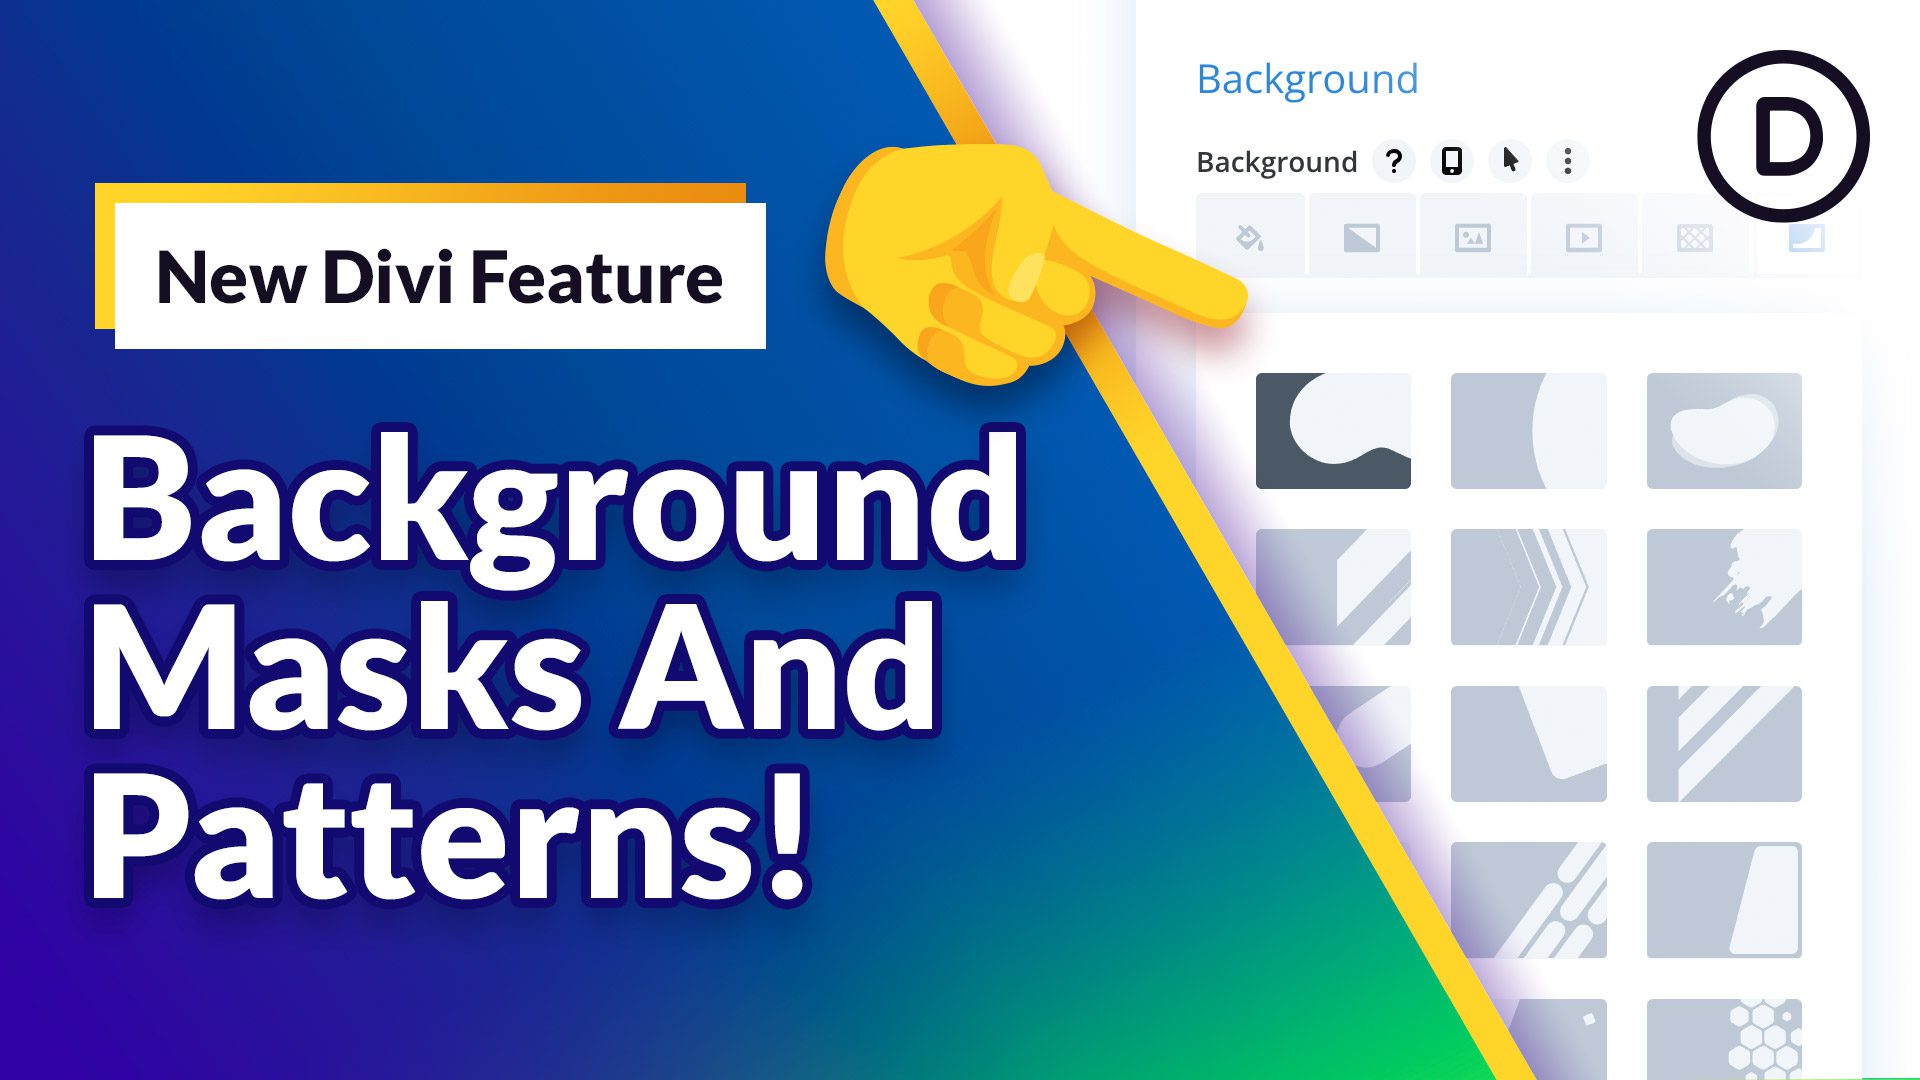 Build Stunning New Backgrounds Using Custom Shapes And Textures